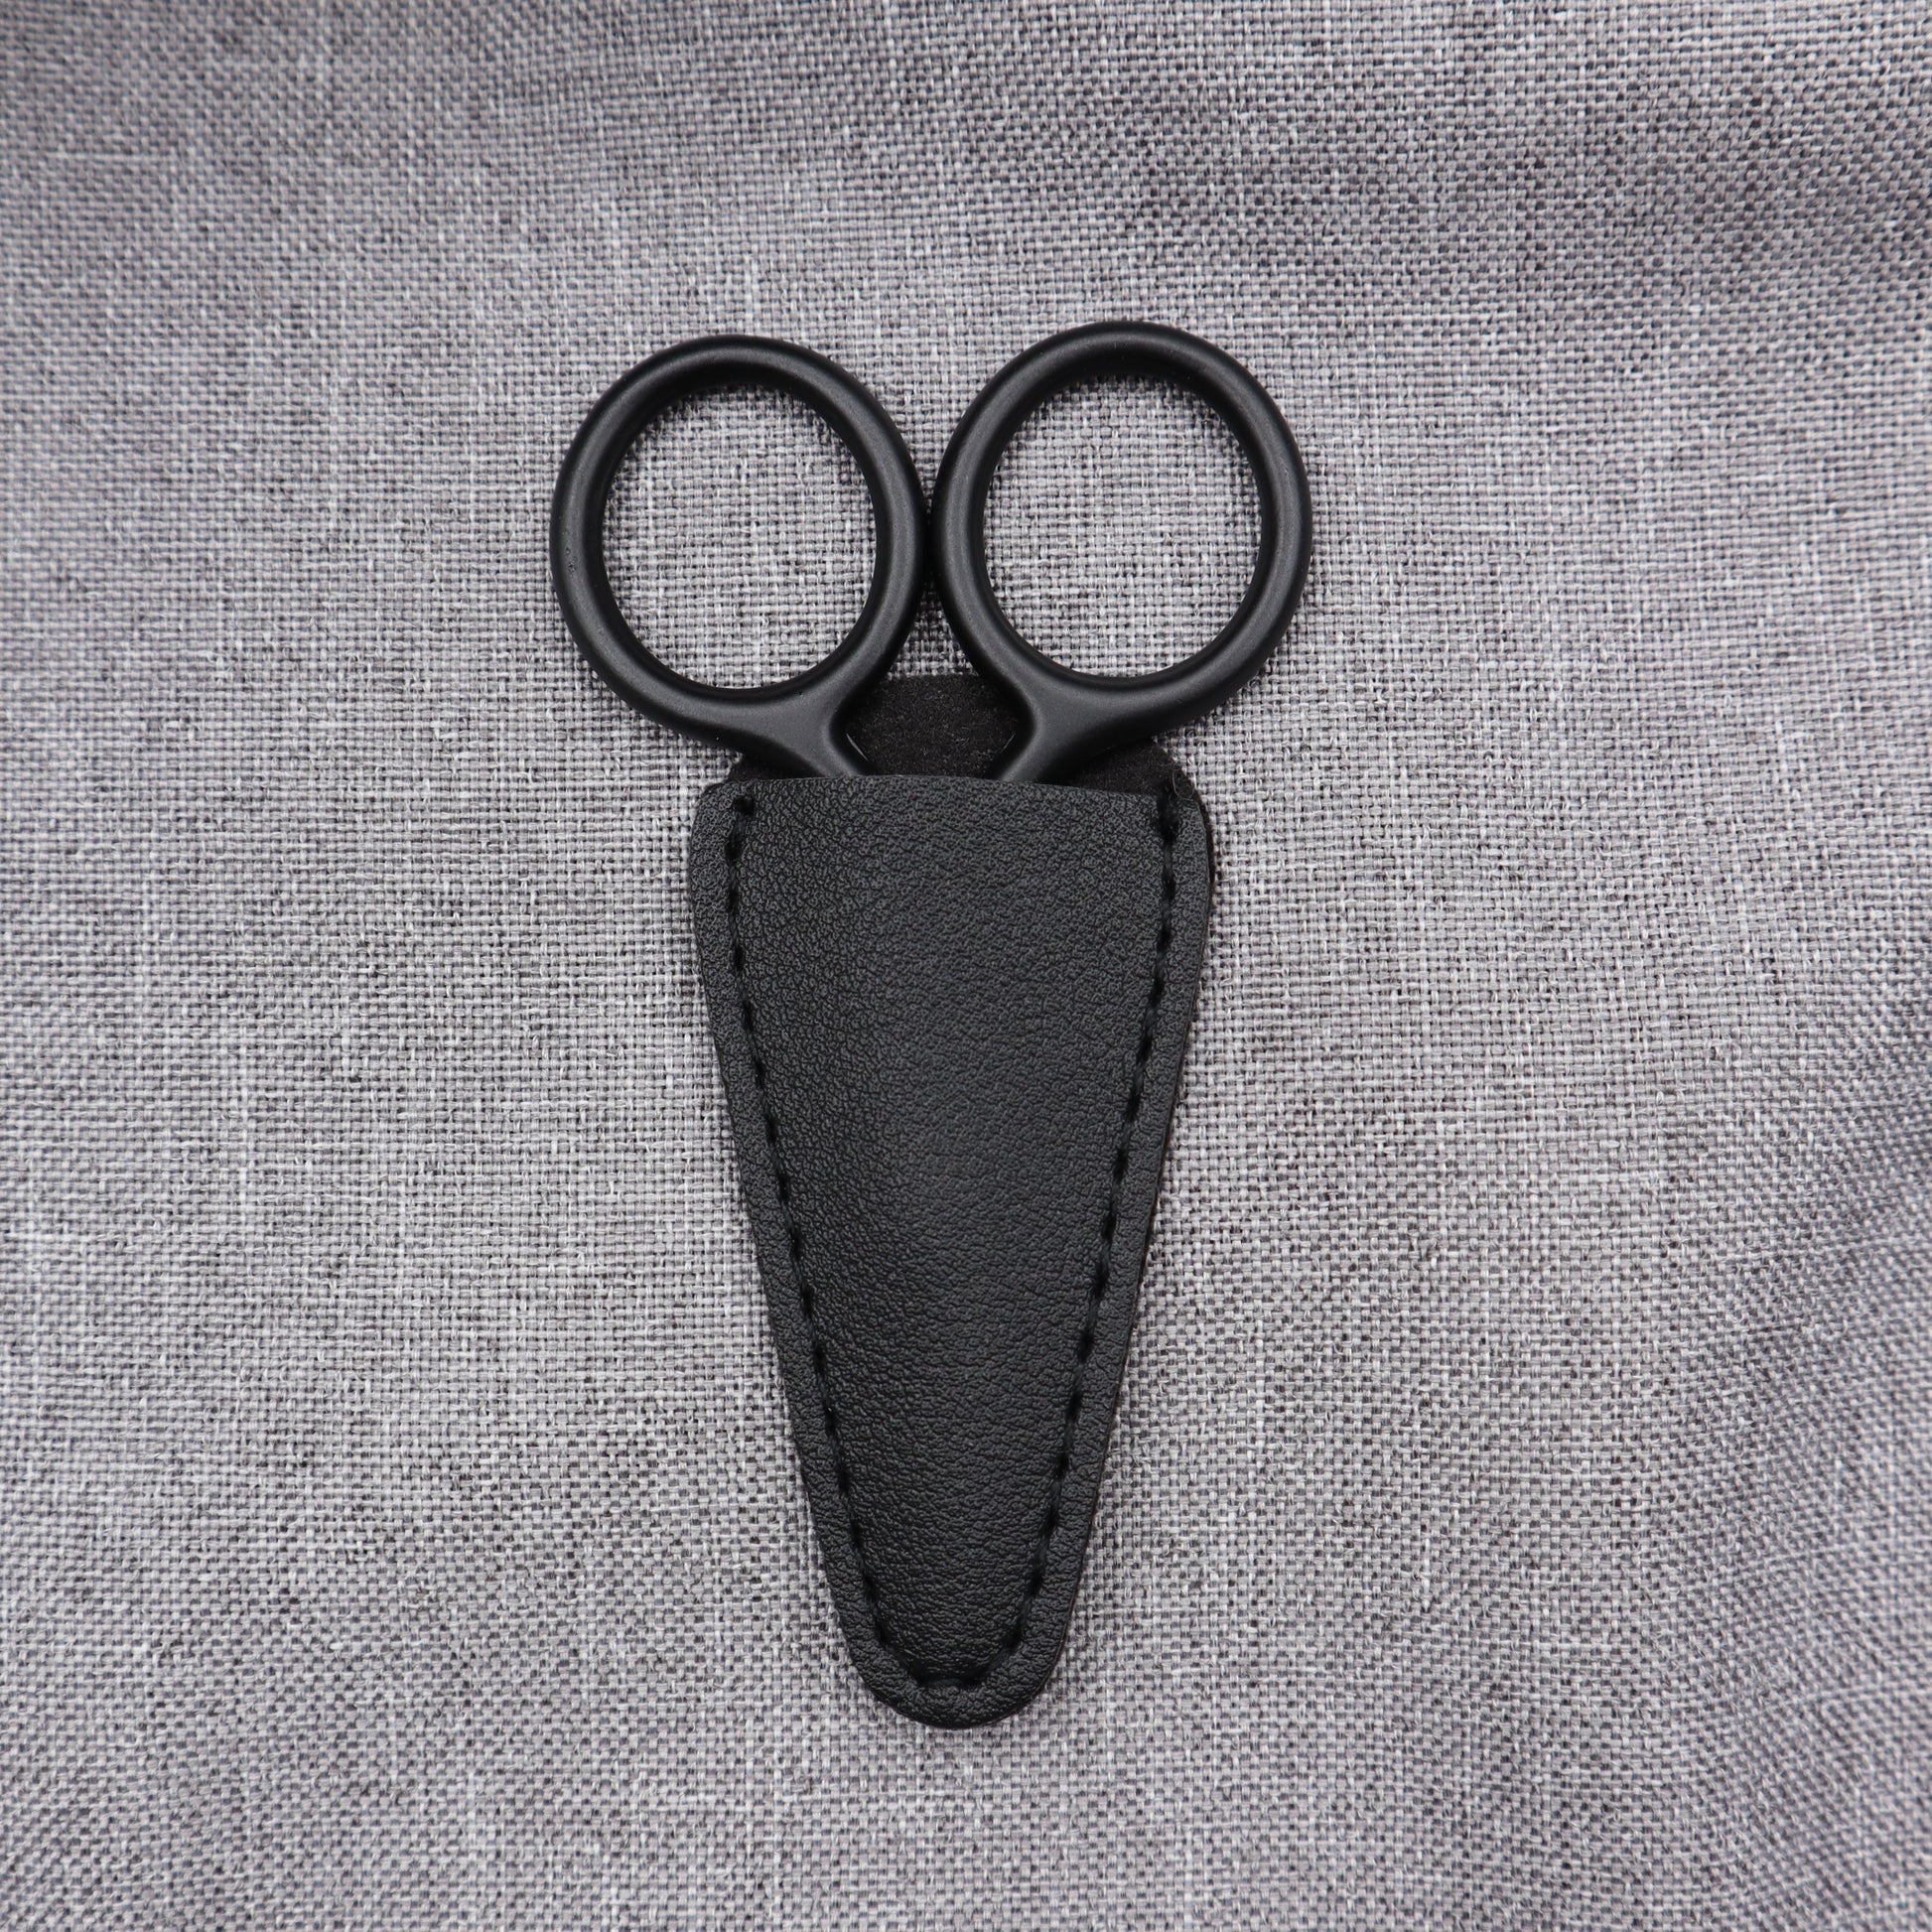 Embroidery Scissors with Protective Faux Leather Sheath - Natural Fibre Arts